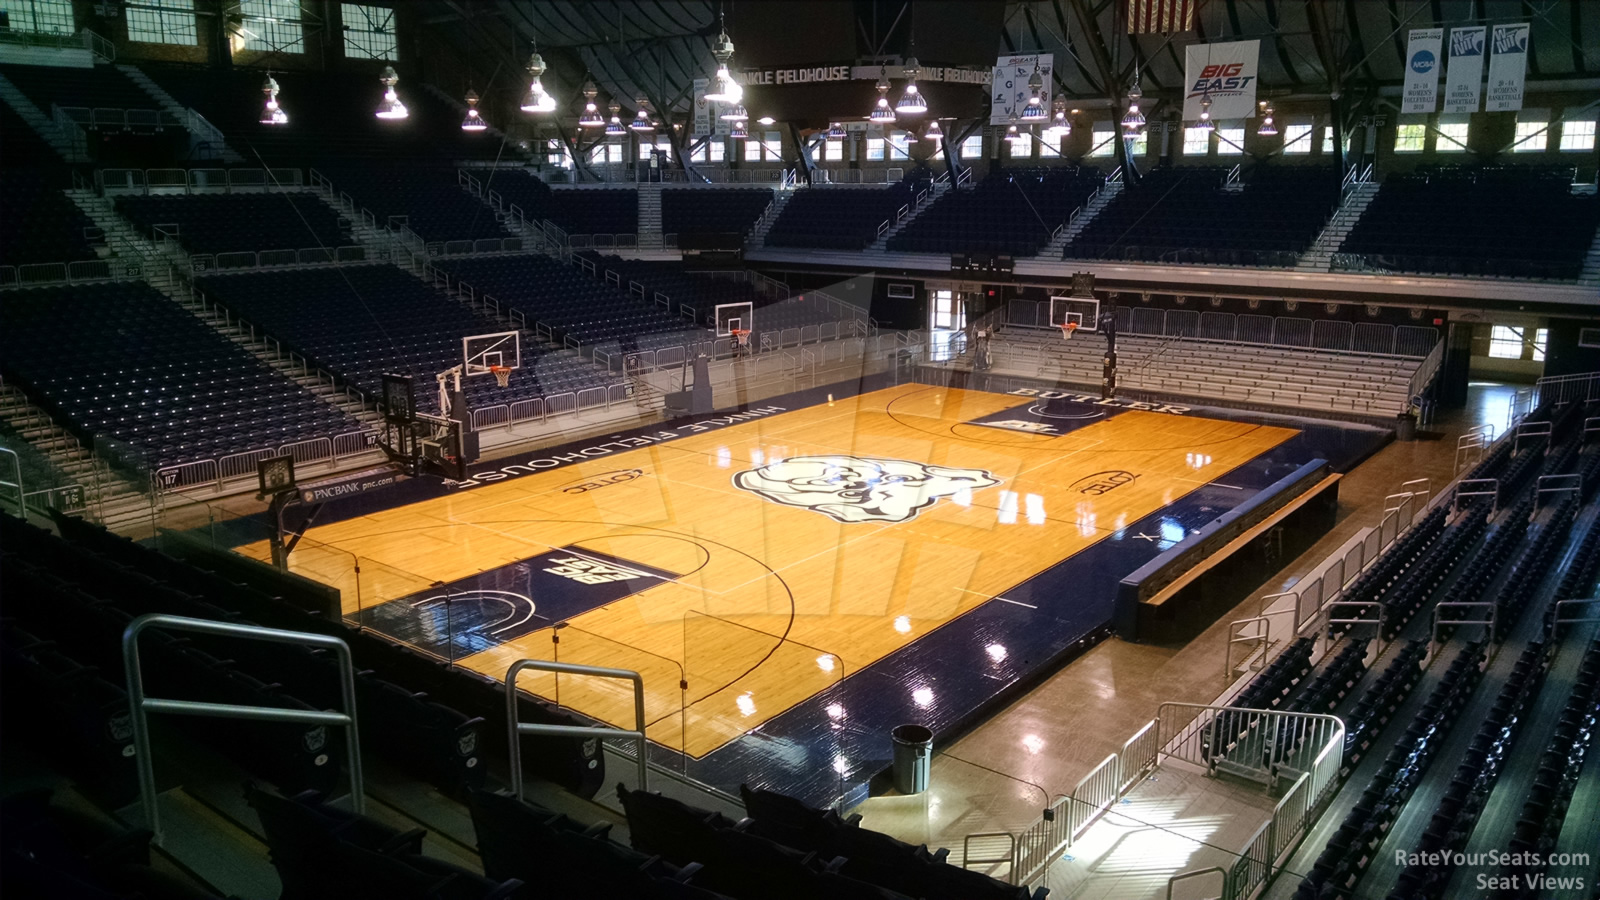 section 210, row 7 seat view  - hinkle fieldhouse